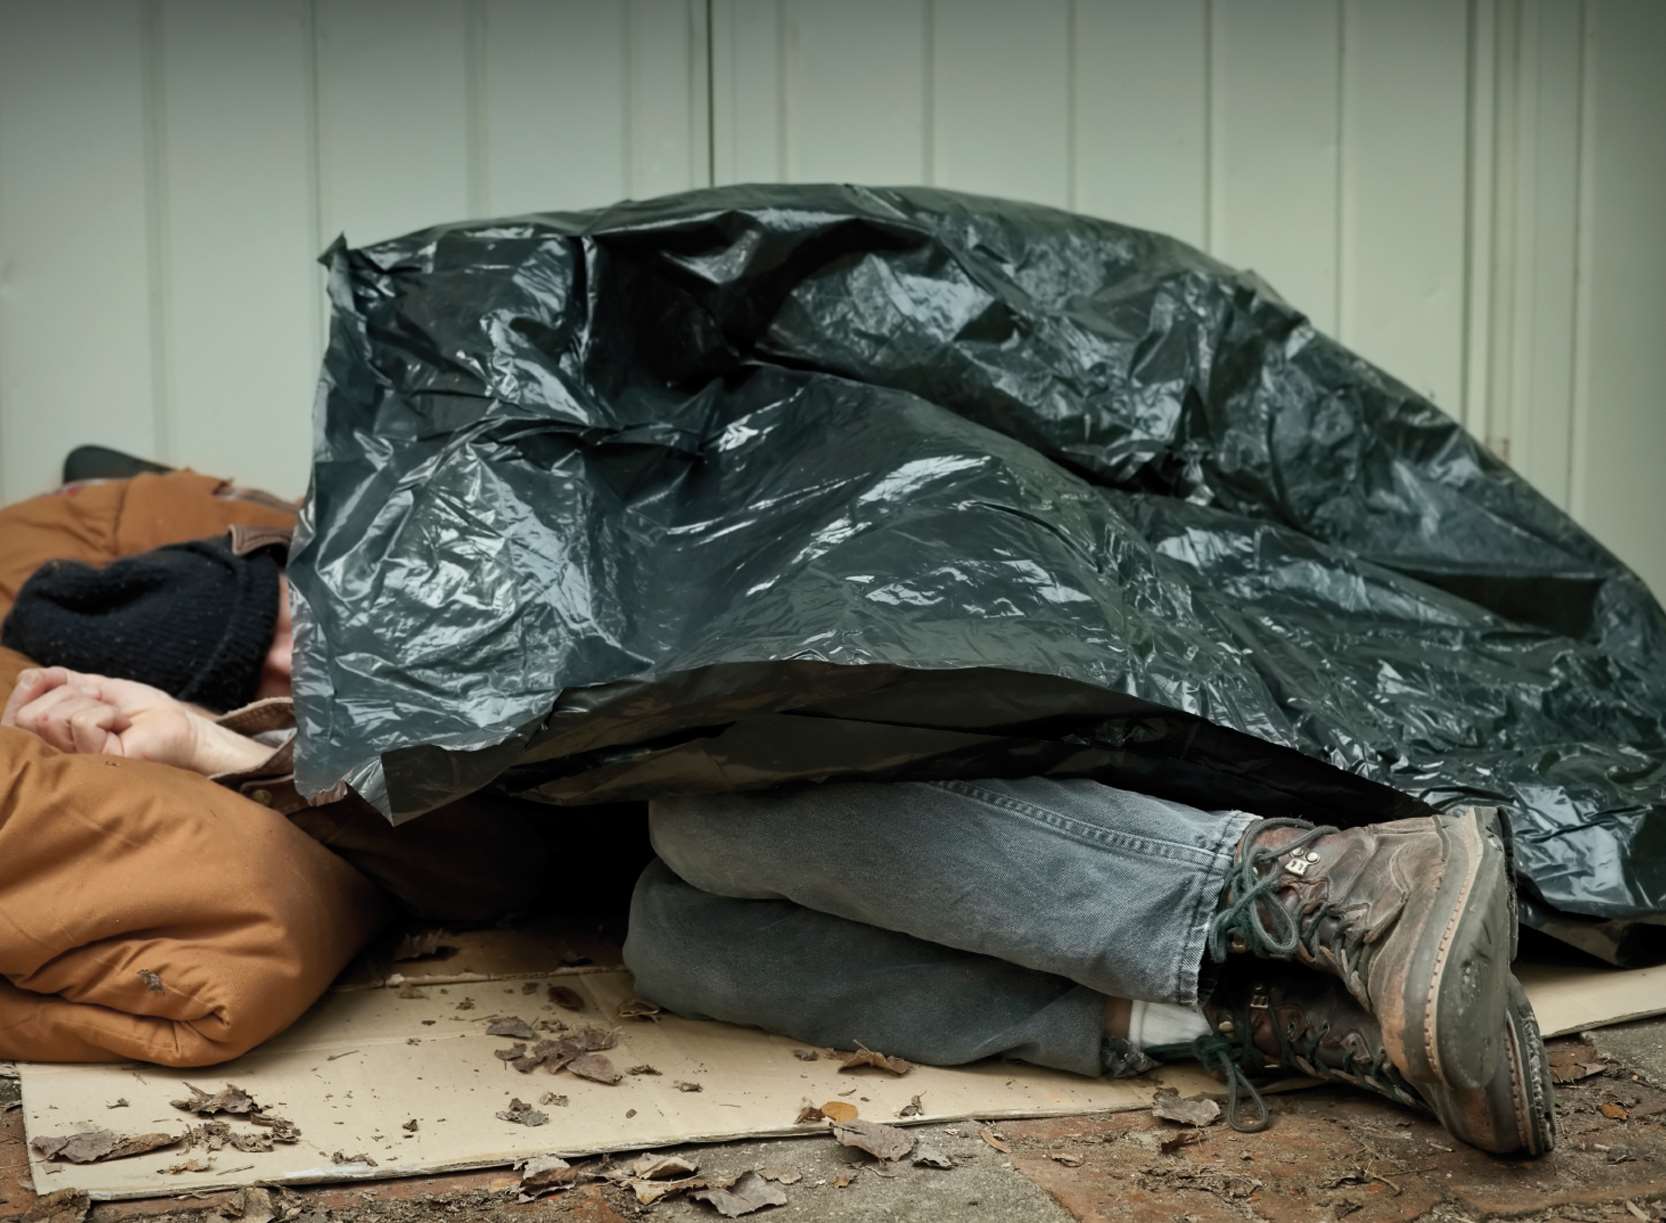 Homeless person living on street. Stock pic.